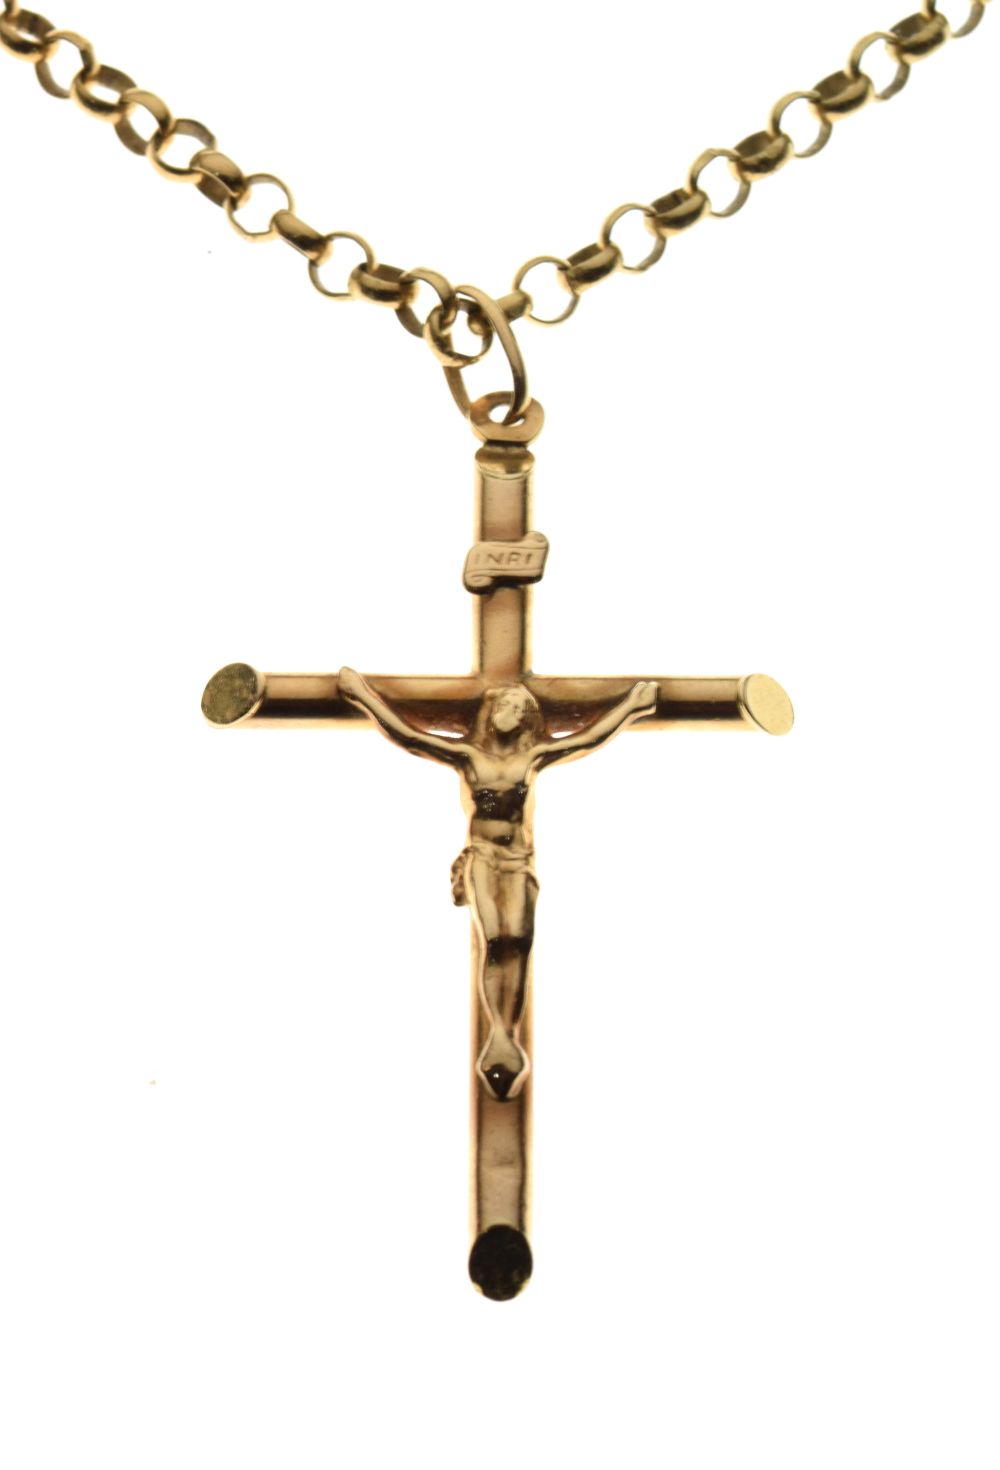 9ct gold hallmarked crucifix on a 9ct gold belcher link chain, 11.3g gross approx